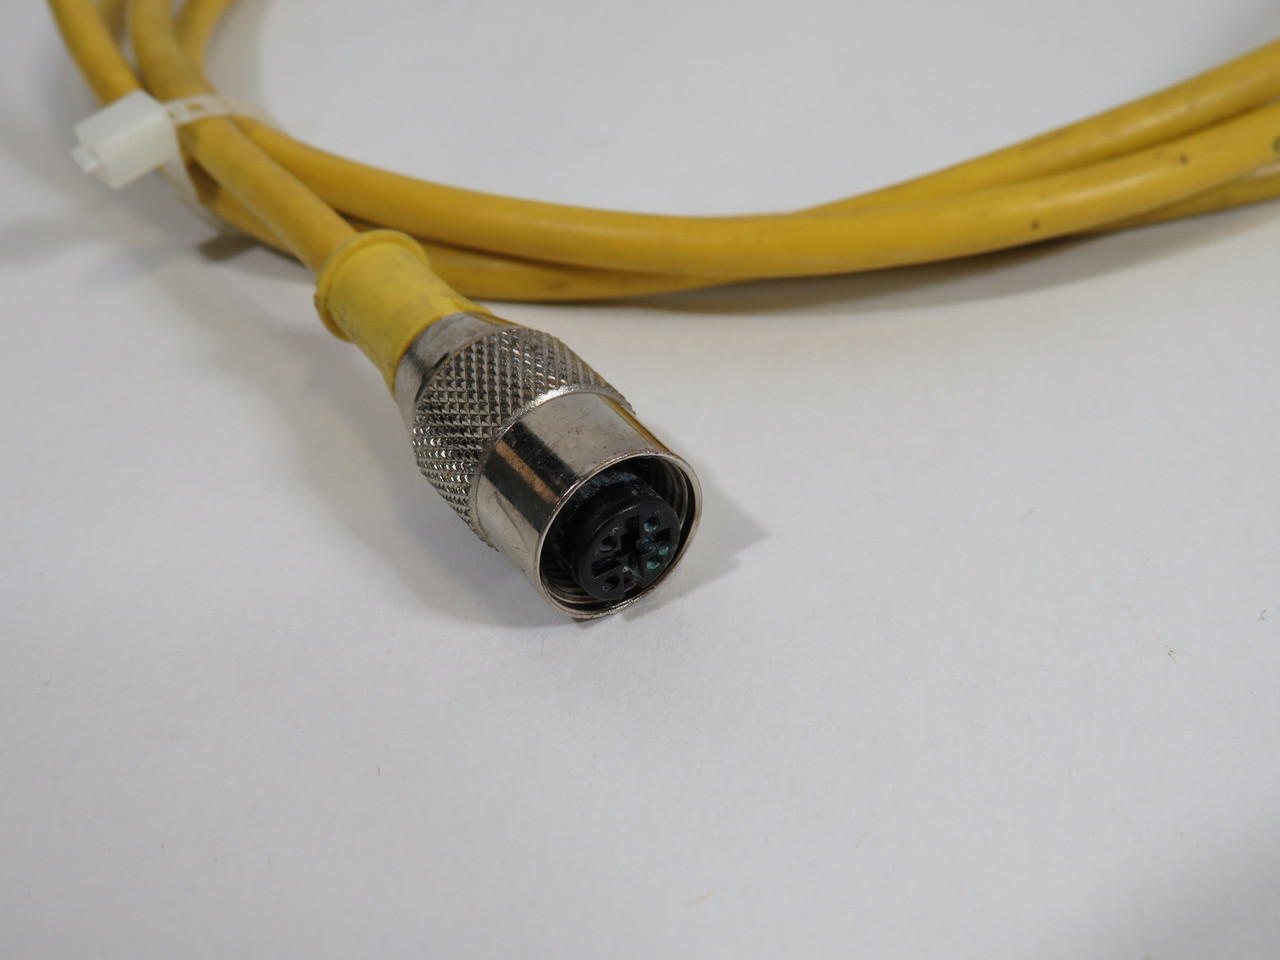 HTM R-FS4TZV075 Cable 4-Pin Female Connector 2m Cut Cable USED